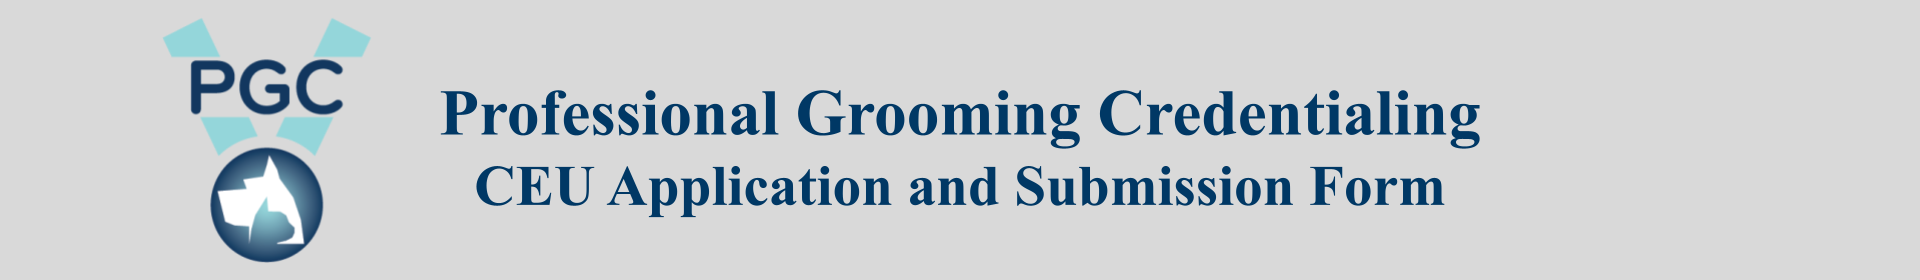 Professional Grooming Credential (PGC) Event Banner